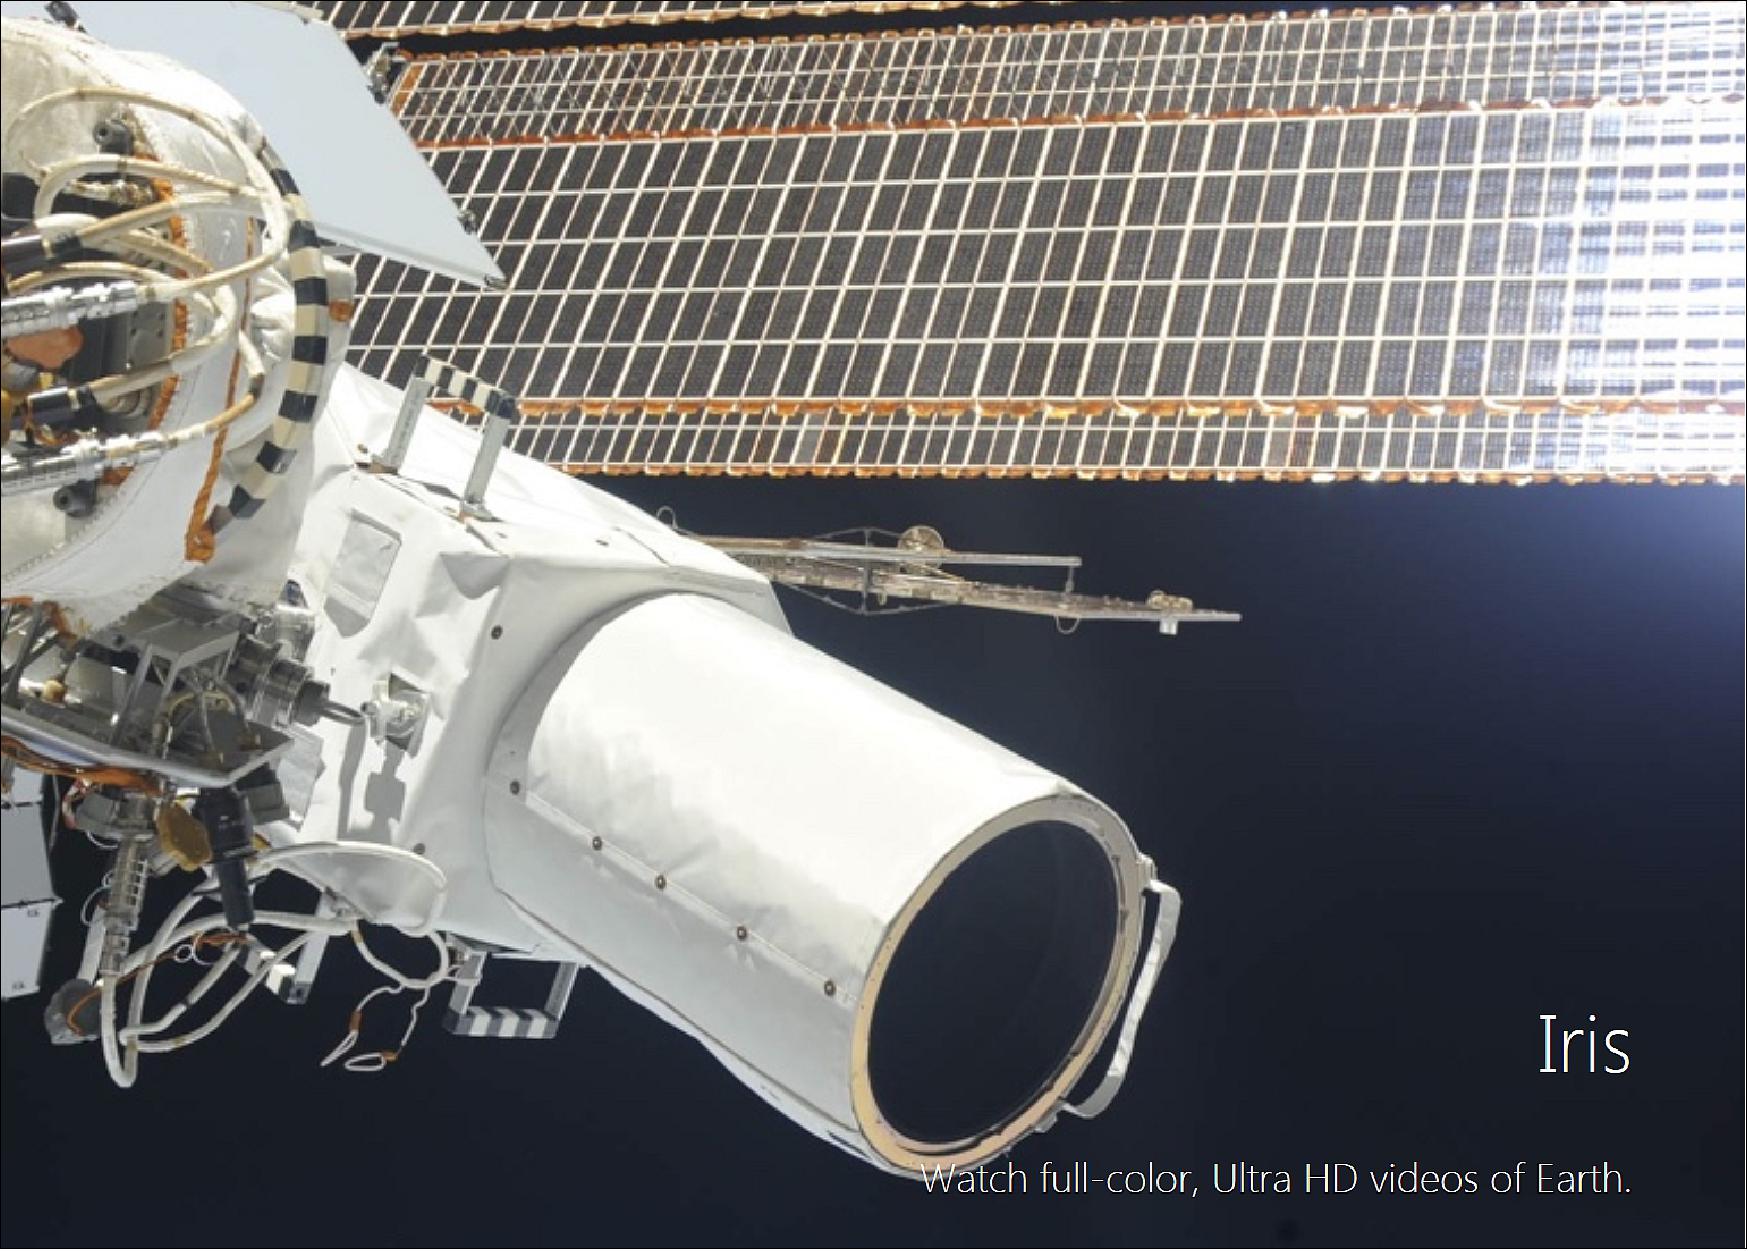 Figure 4: Photo of the installed Iris video camera on the ISS (image credit: UrtheCast)